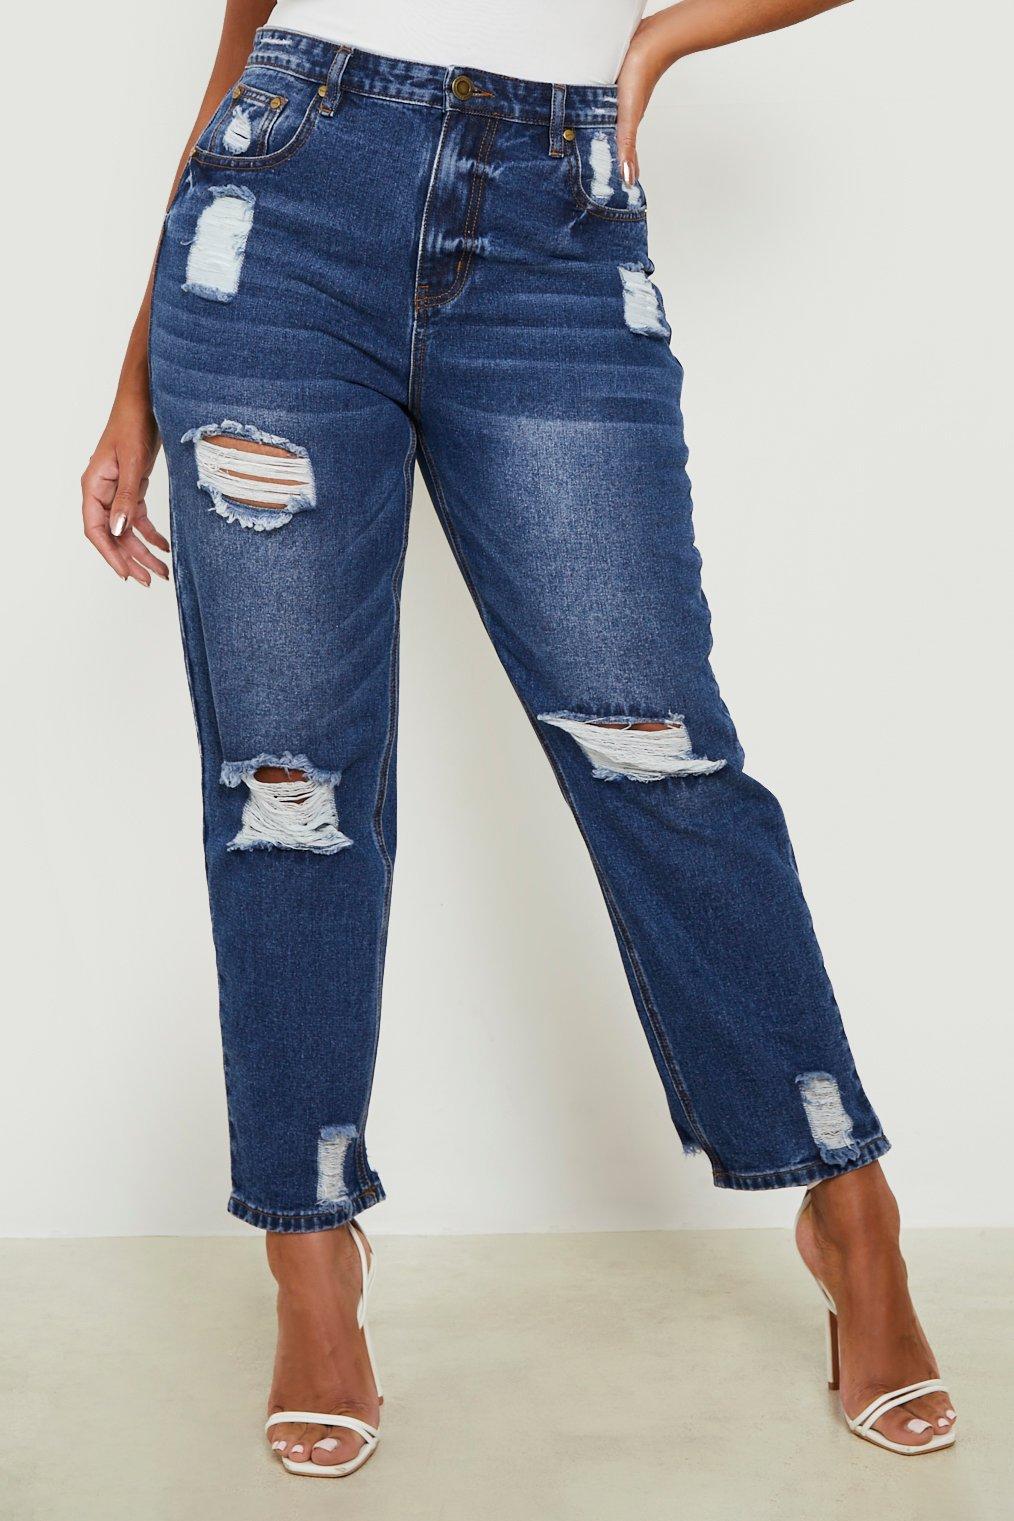 Page 3 - Mom Jeans, High Waisted Ripped & Stretch Mom Jeans